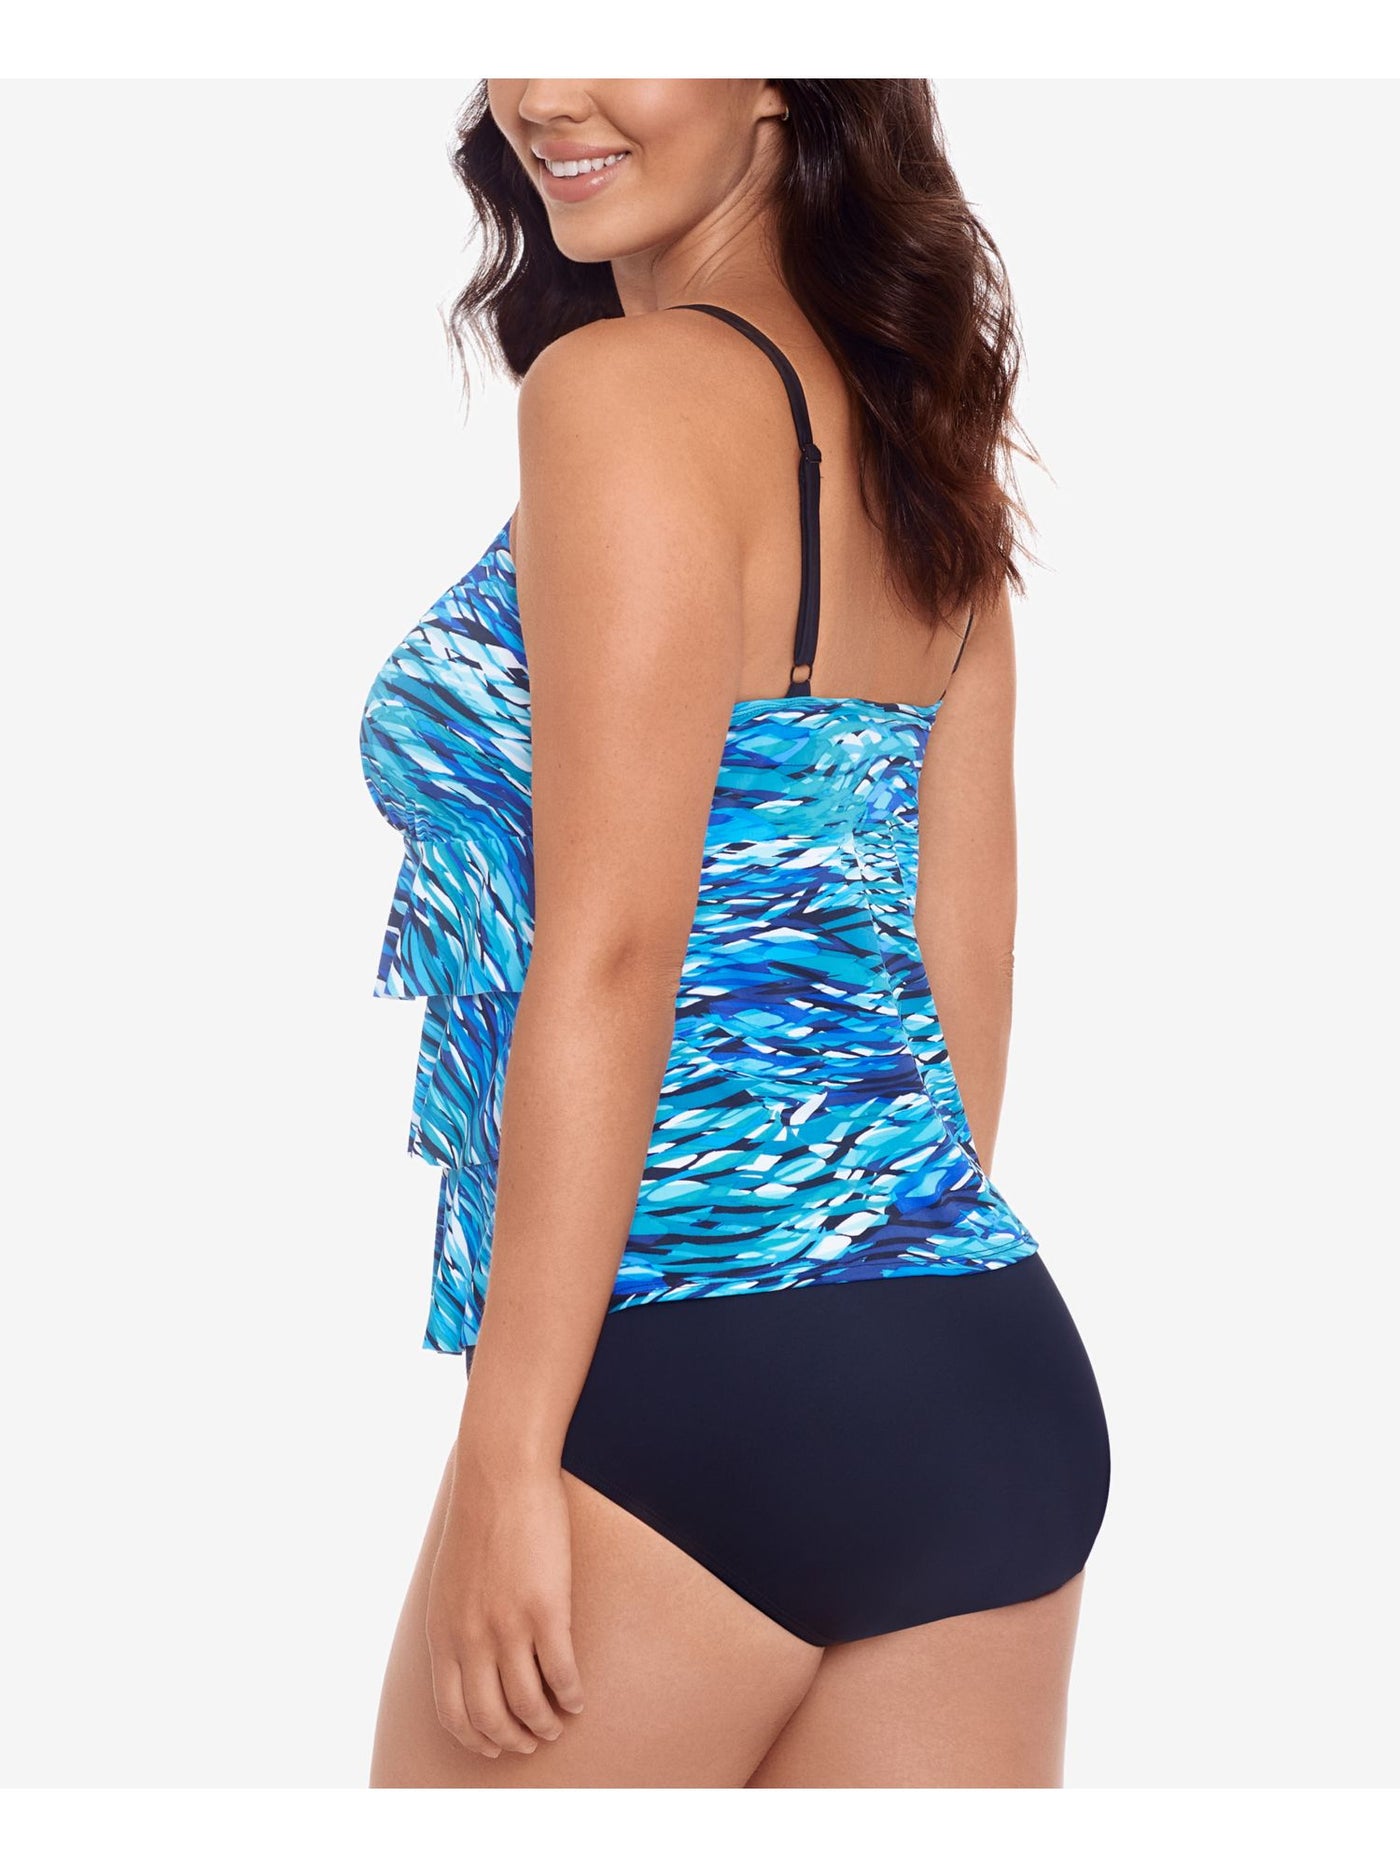 SWIM SOLUTIONS Women's Blue Patterned Stretch Tummy Control Lined Tiered Adjustable Fixed Cups Scoop Neck One Piece Swimsuit 8